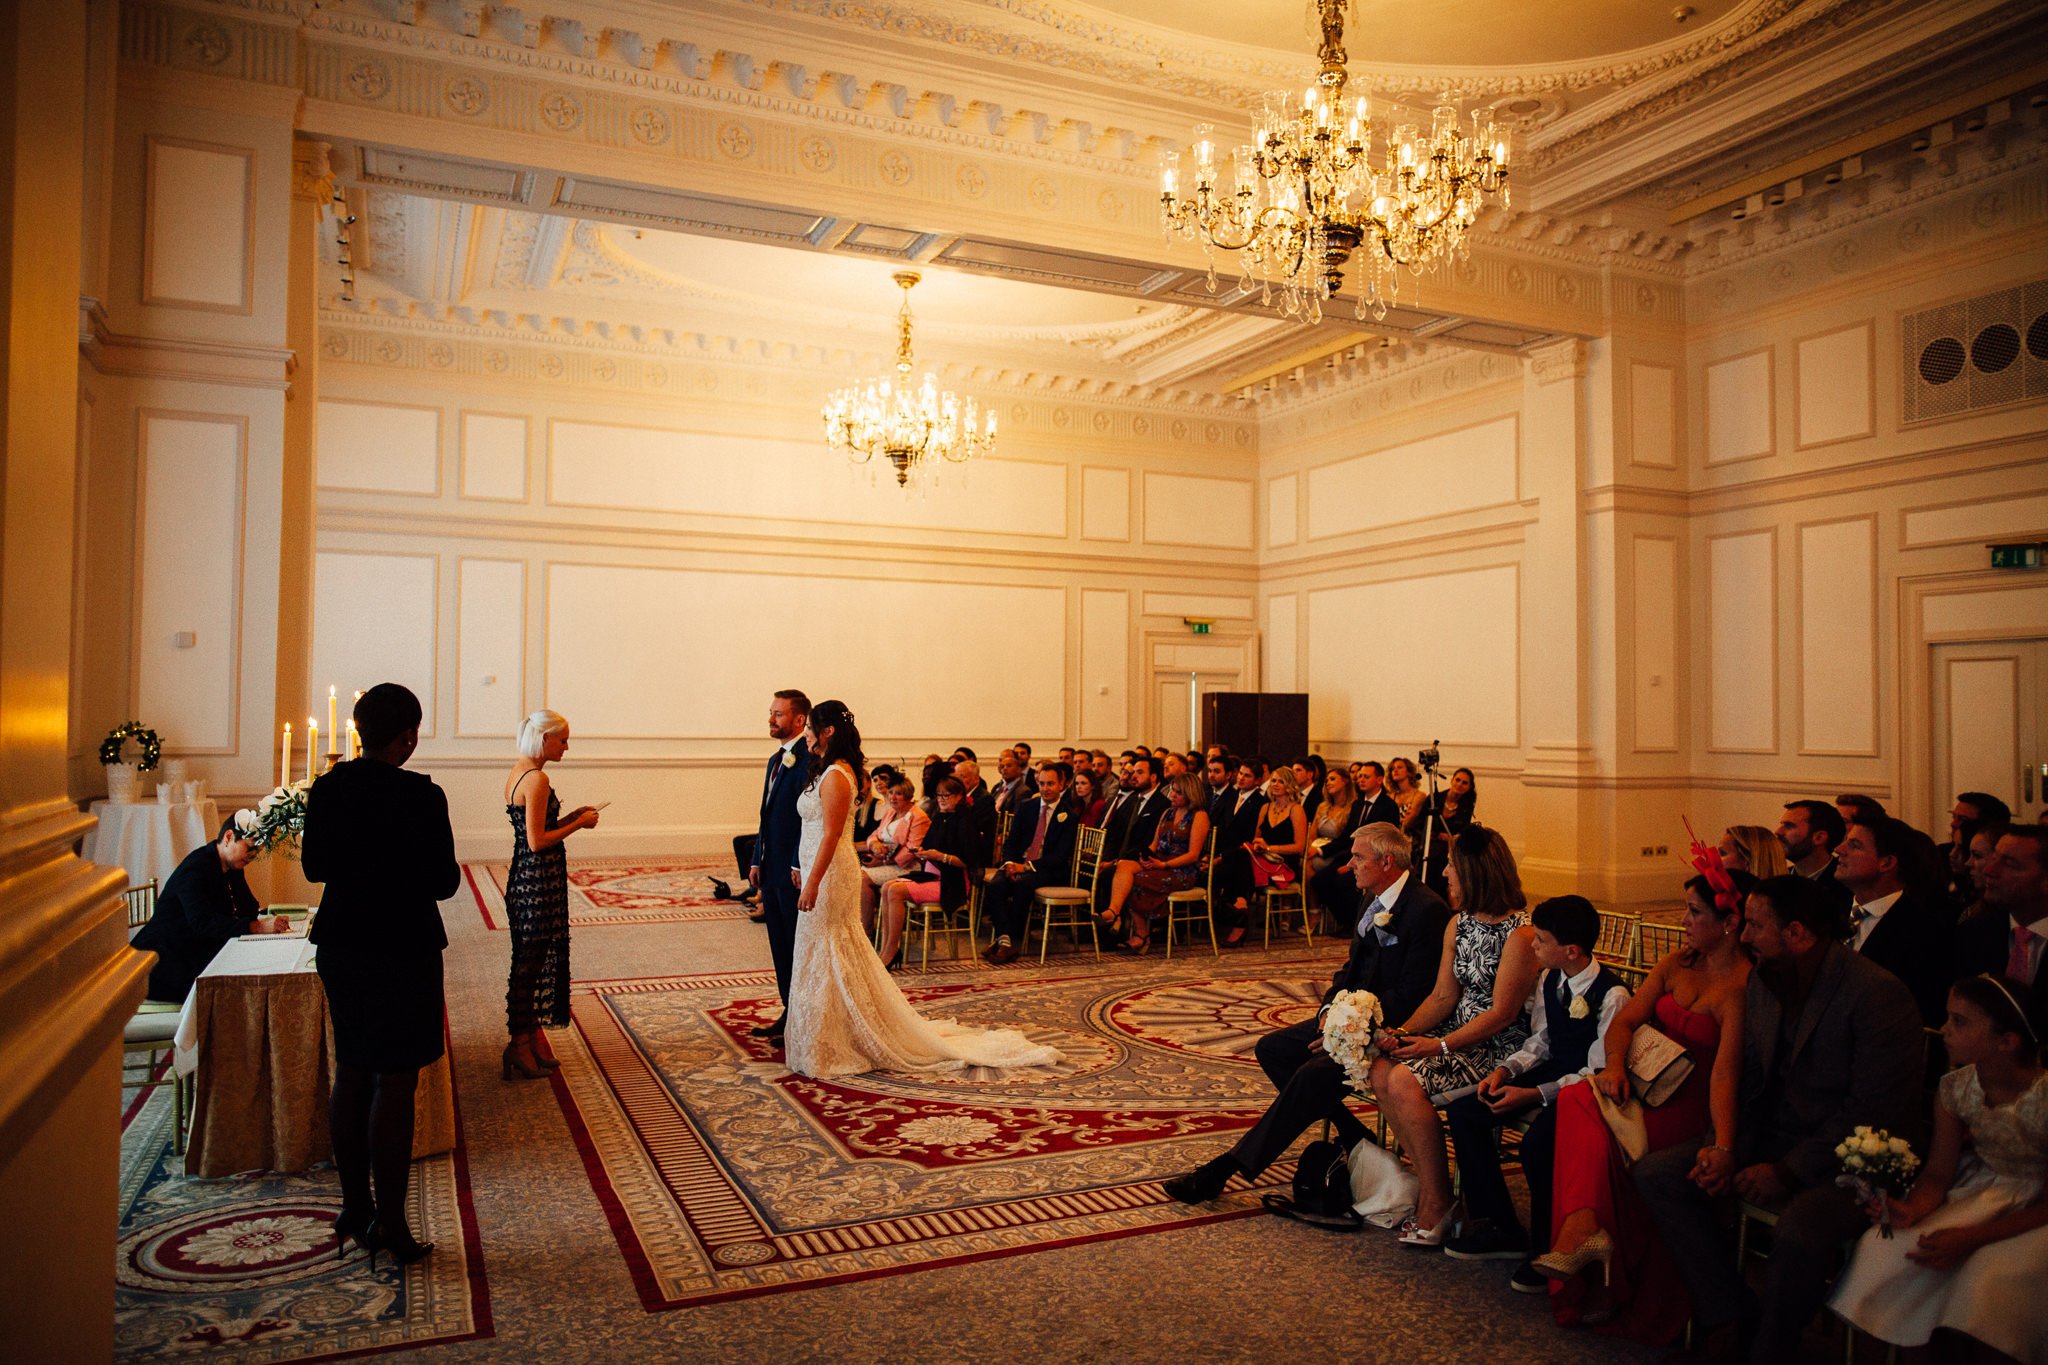  Lady gives a reading in front of the wedding party at The Landmark London hotel 